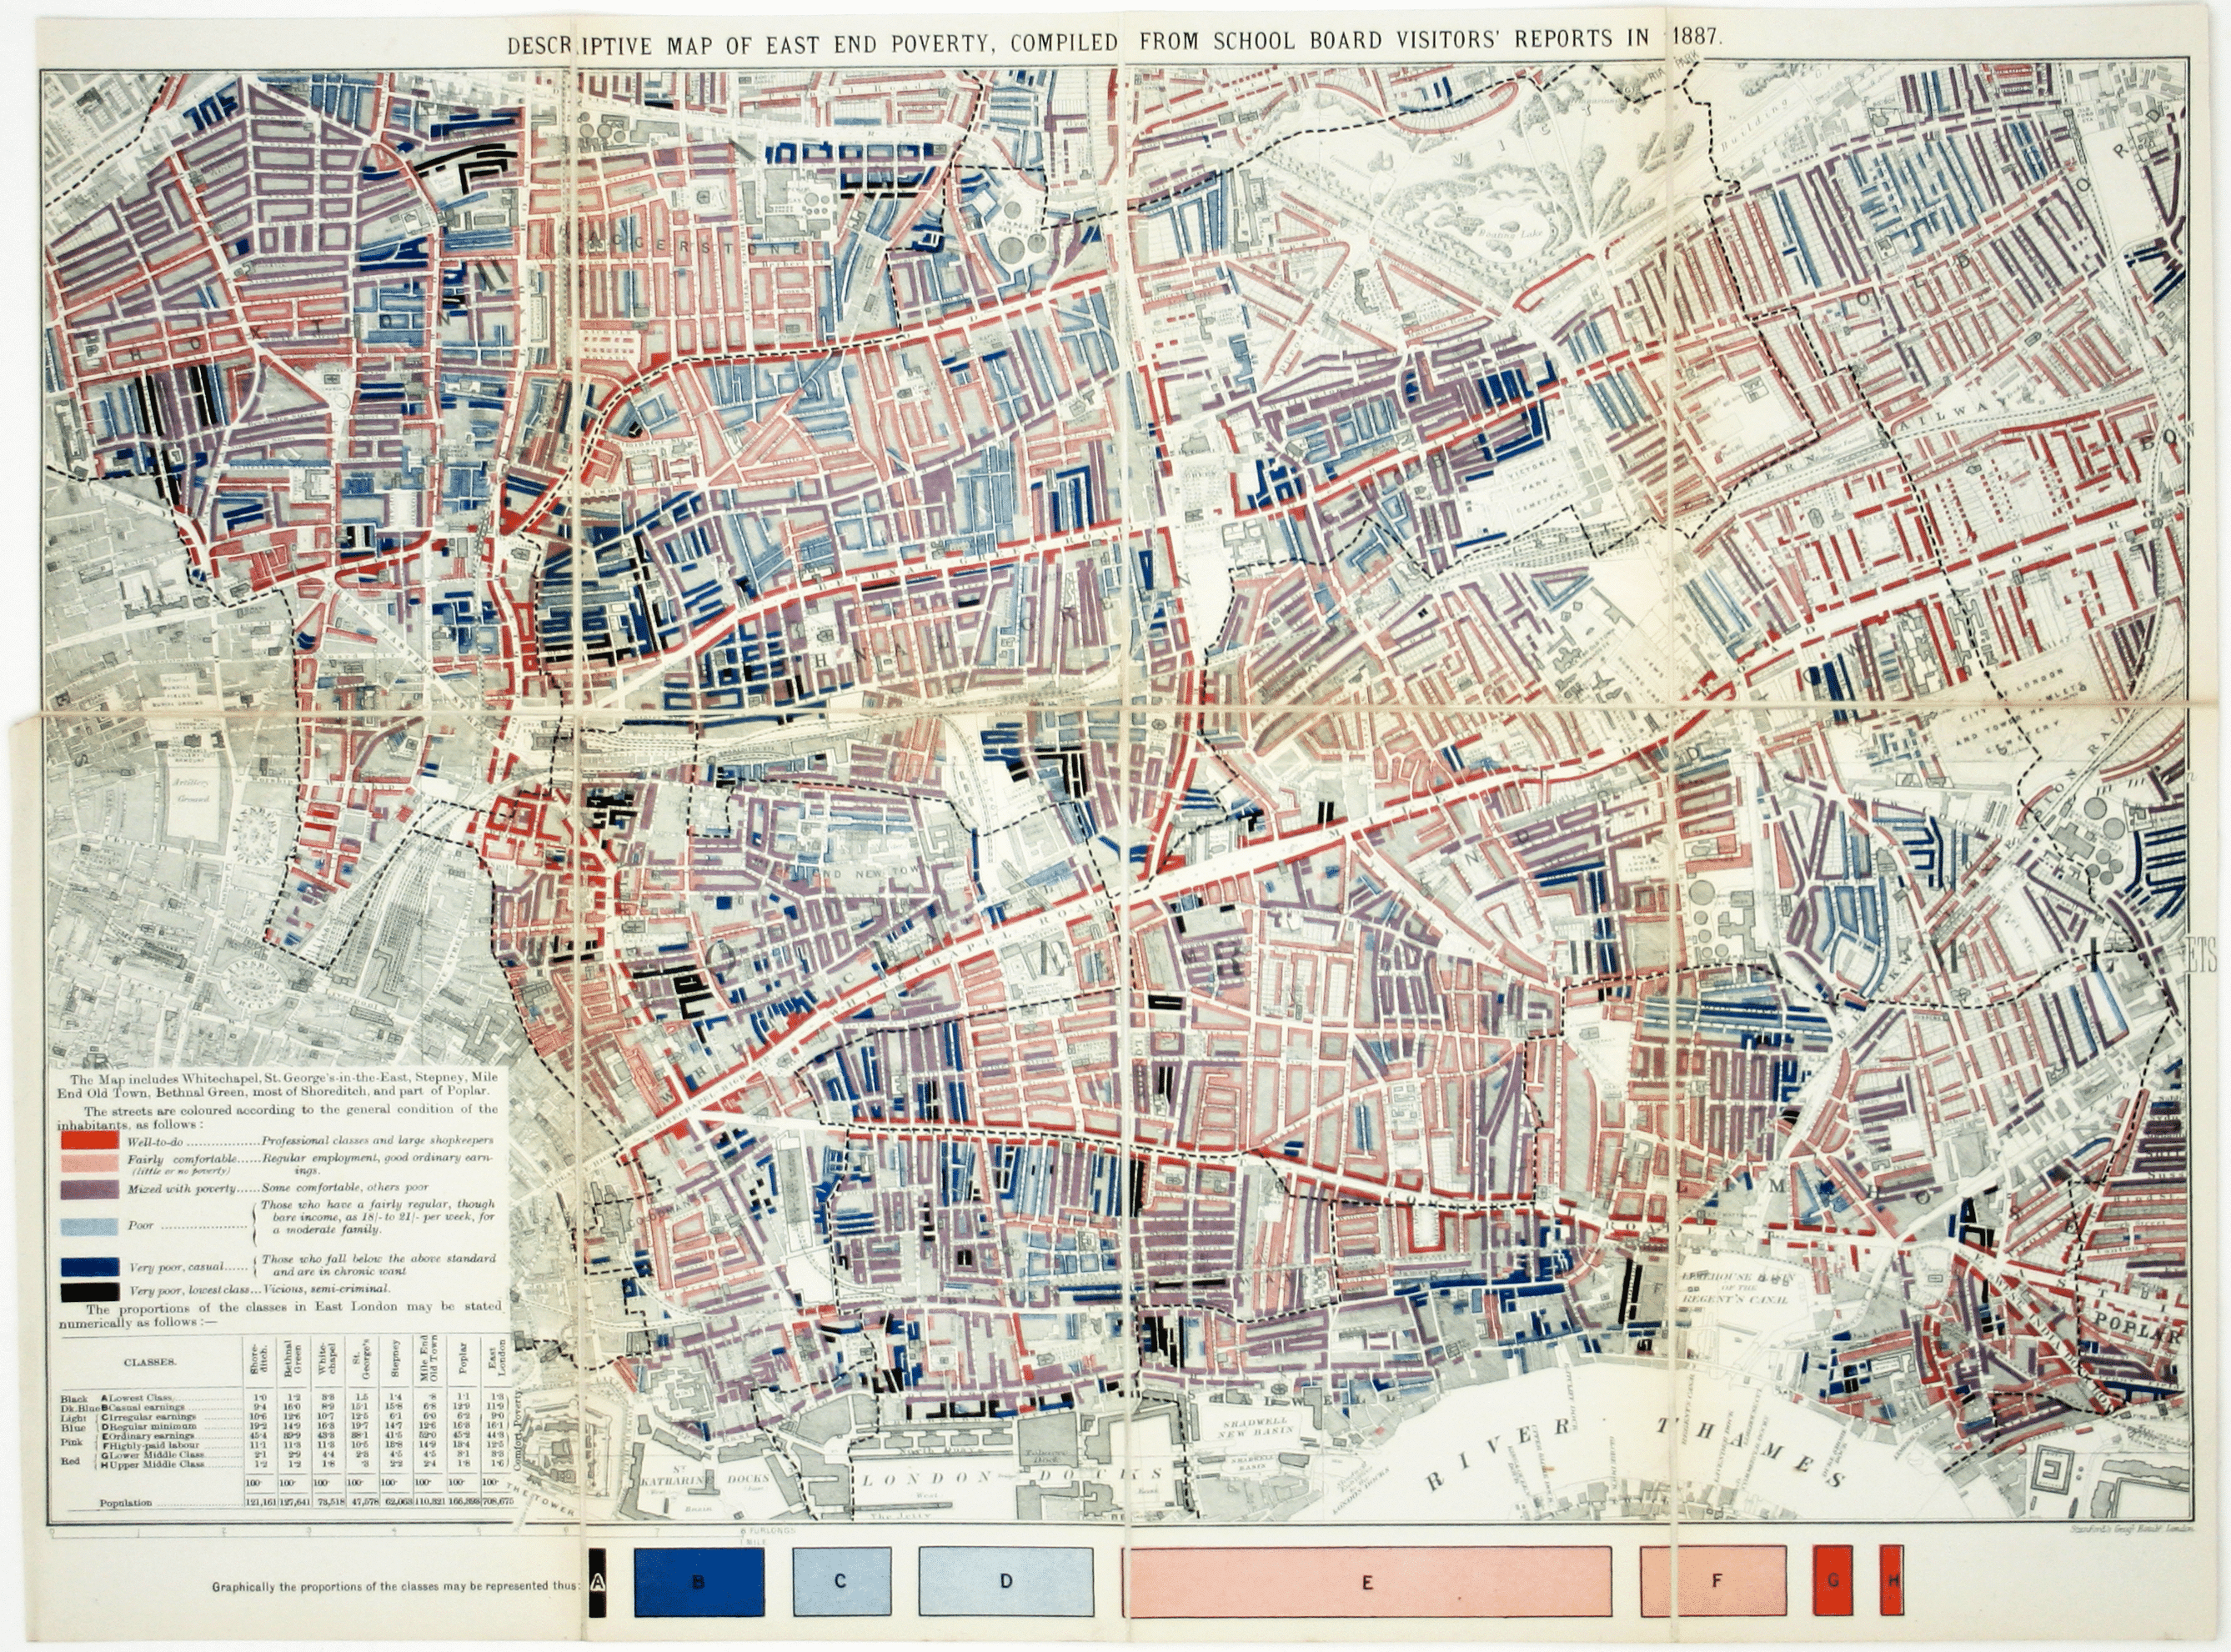 Booth’s Poverty Map of London’s East End